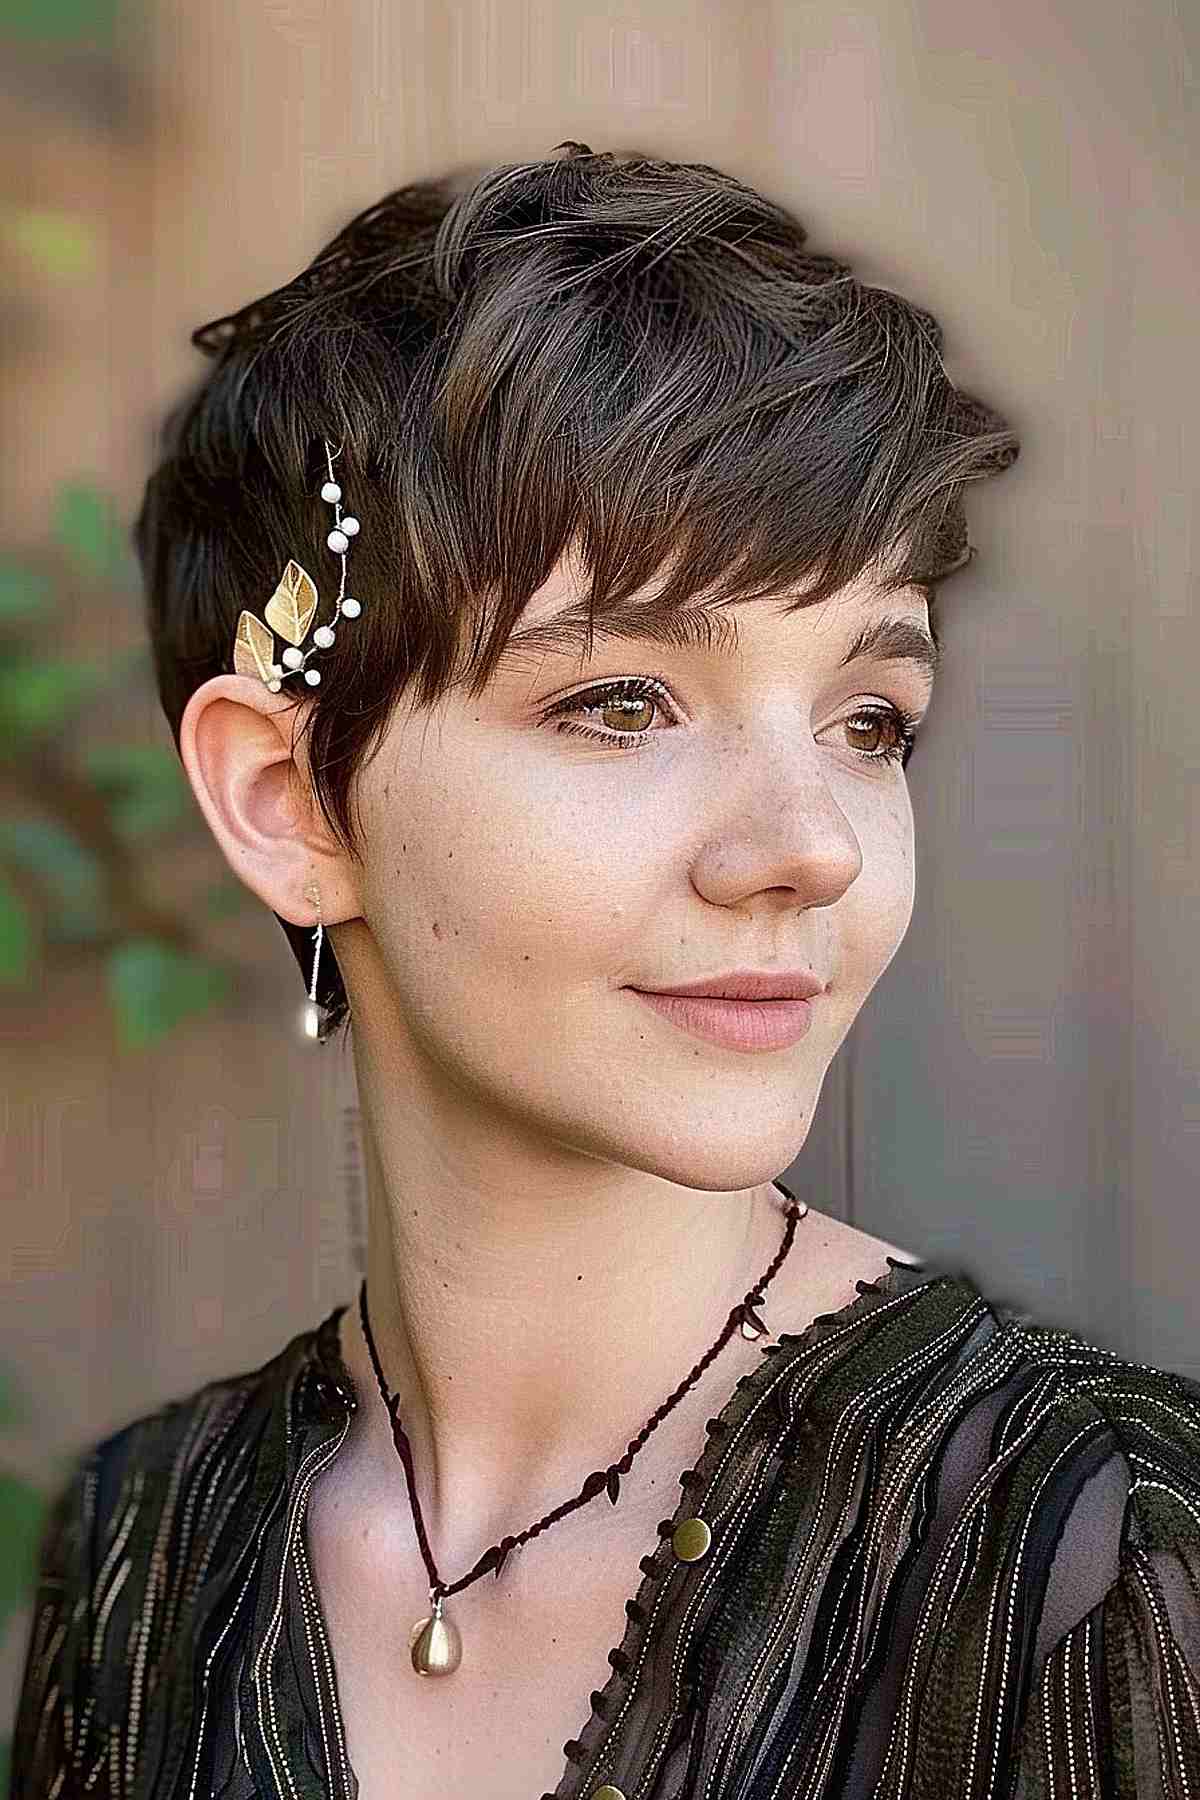 Fairy-inspired short elf crop haircut with soft, wispy bangs and decorative hairpin.